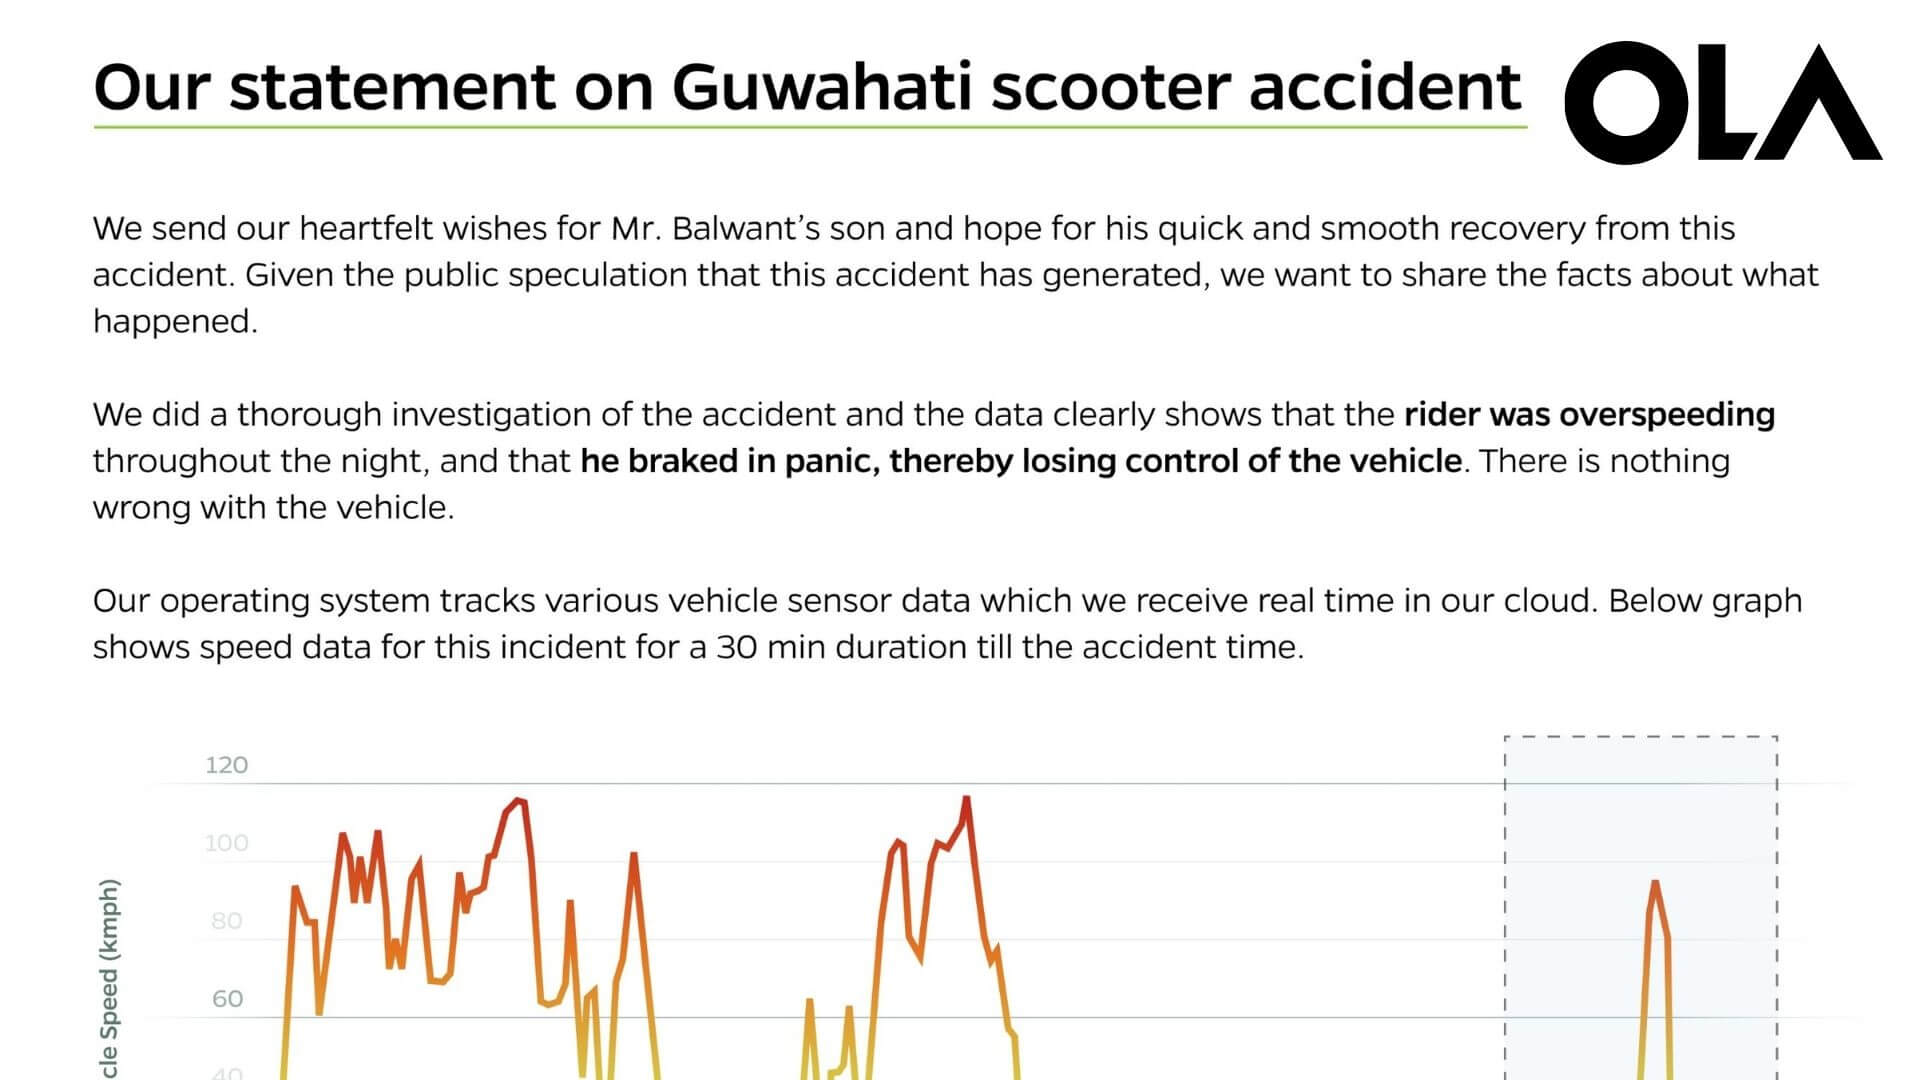 https://e-vehicleinfo.com/ola-electric-shared-its-statement-on-the-guwahati-e-scooter-fire-accident/